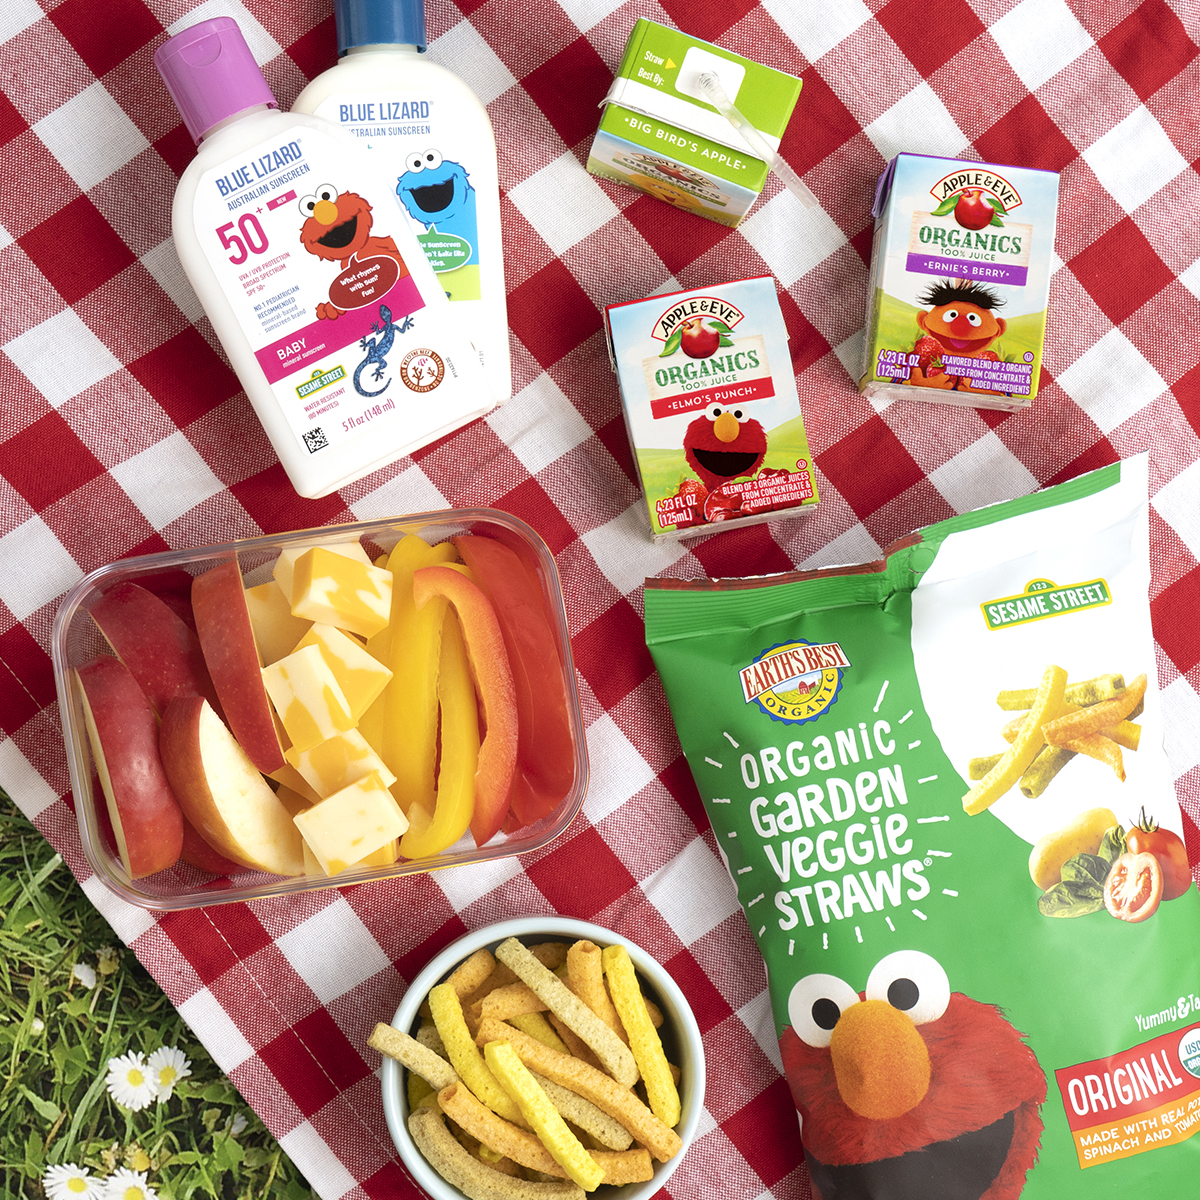 Picnic scene with Blue Lizard Sunscreen, Apple & Eve juice boxes and Earth''s Best Organic Garden Veggie Straws